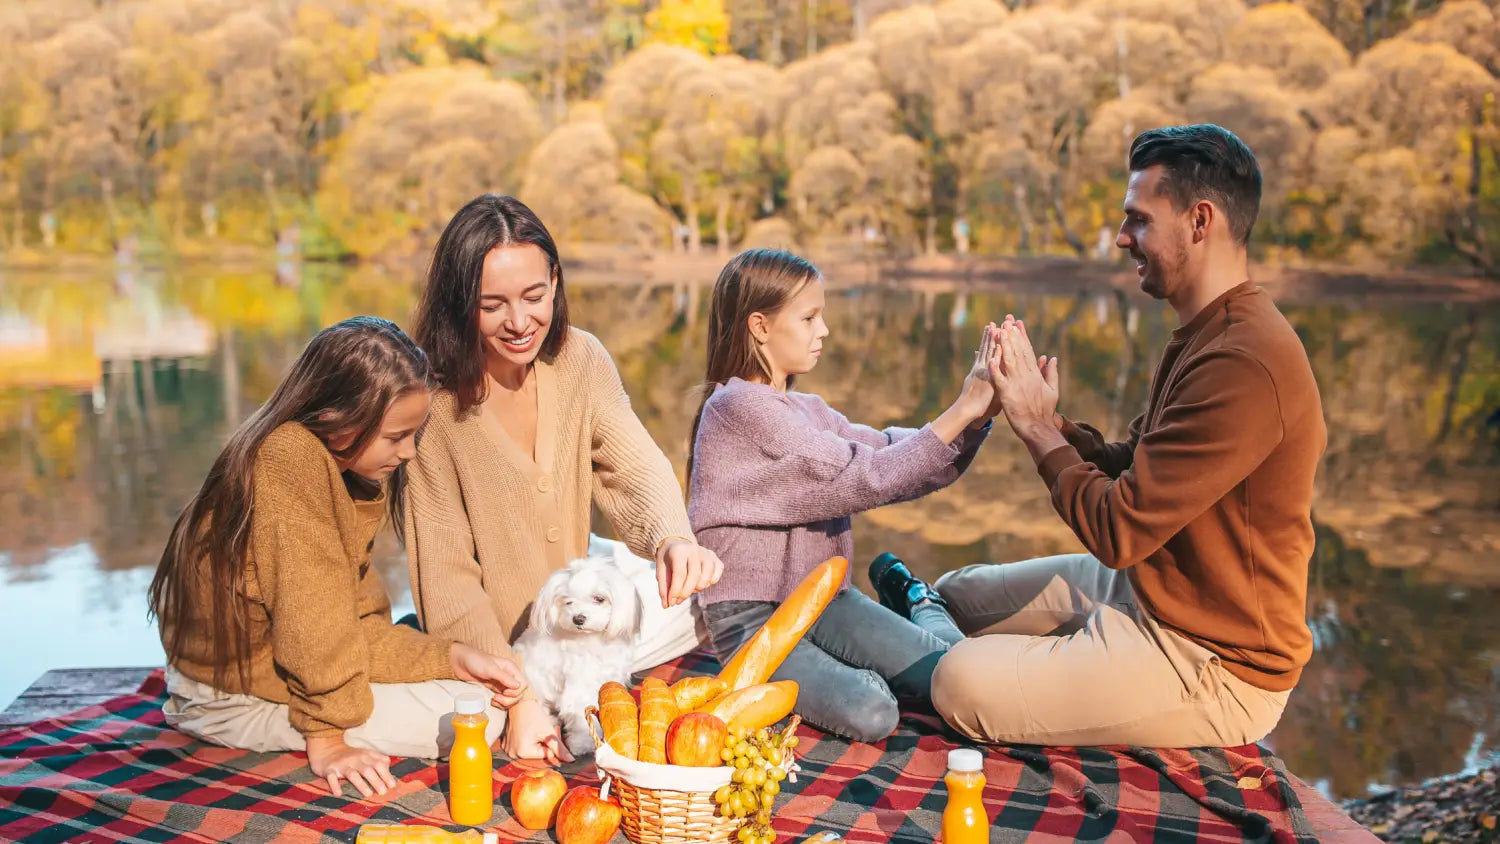 11 Unique Family Activities to Help You Connect With Loved Ones